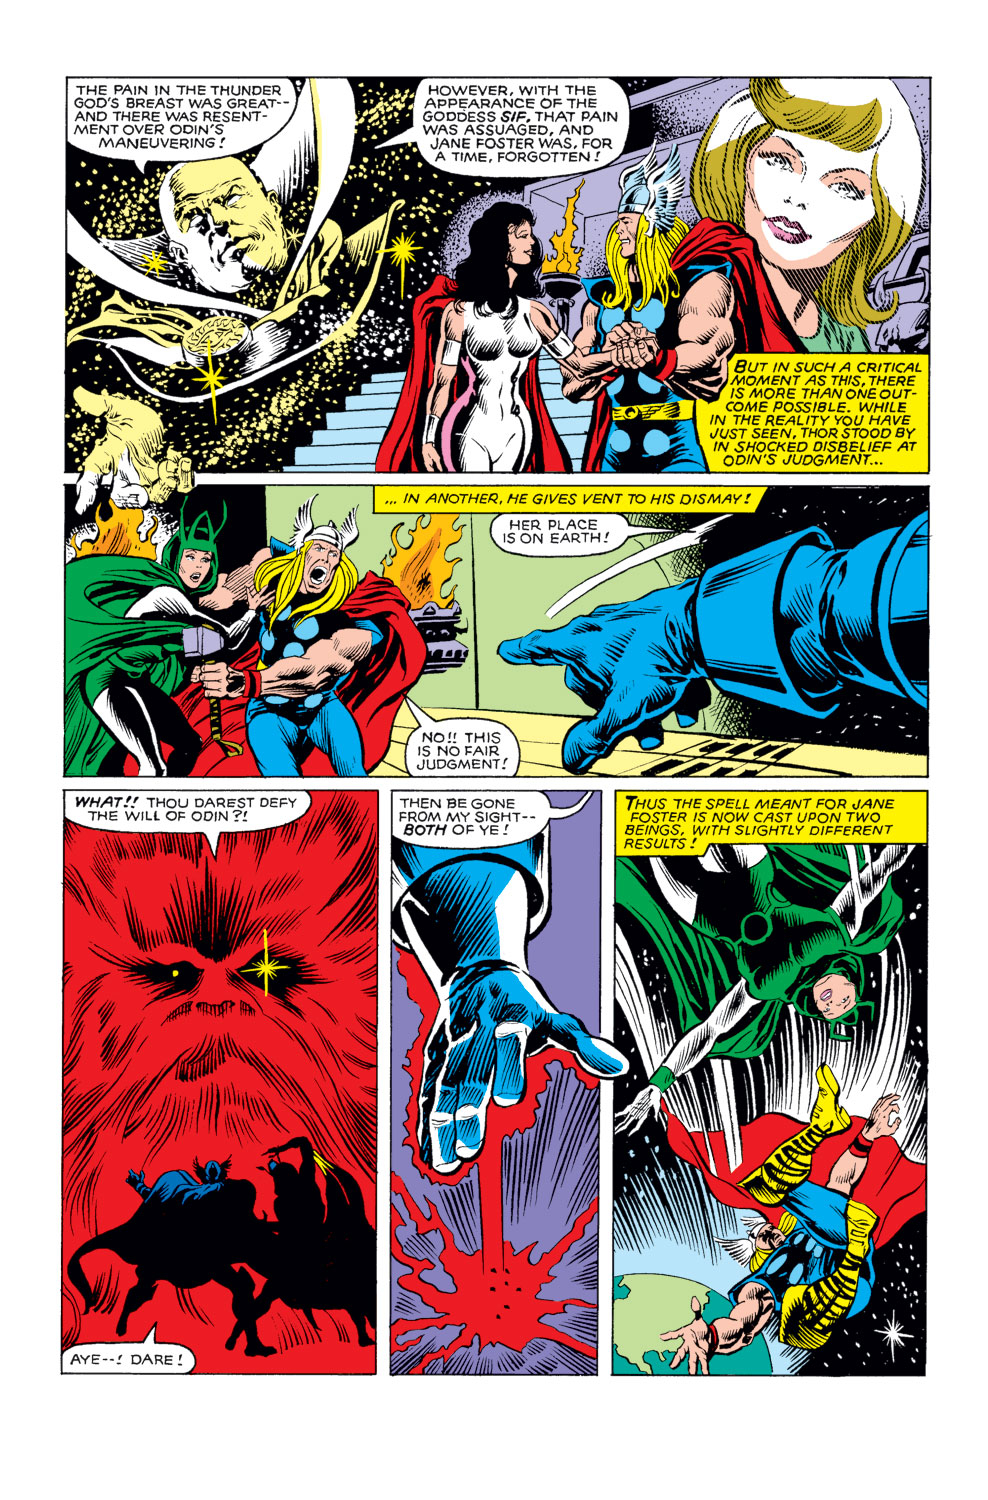 What If? (1977) issue 25 - Thor and the Avengers battled the gods - Page 5